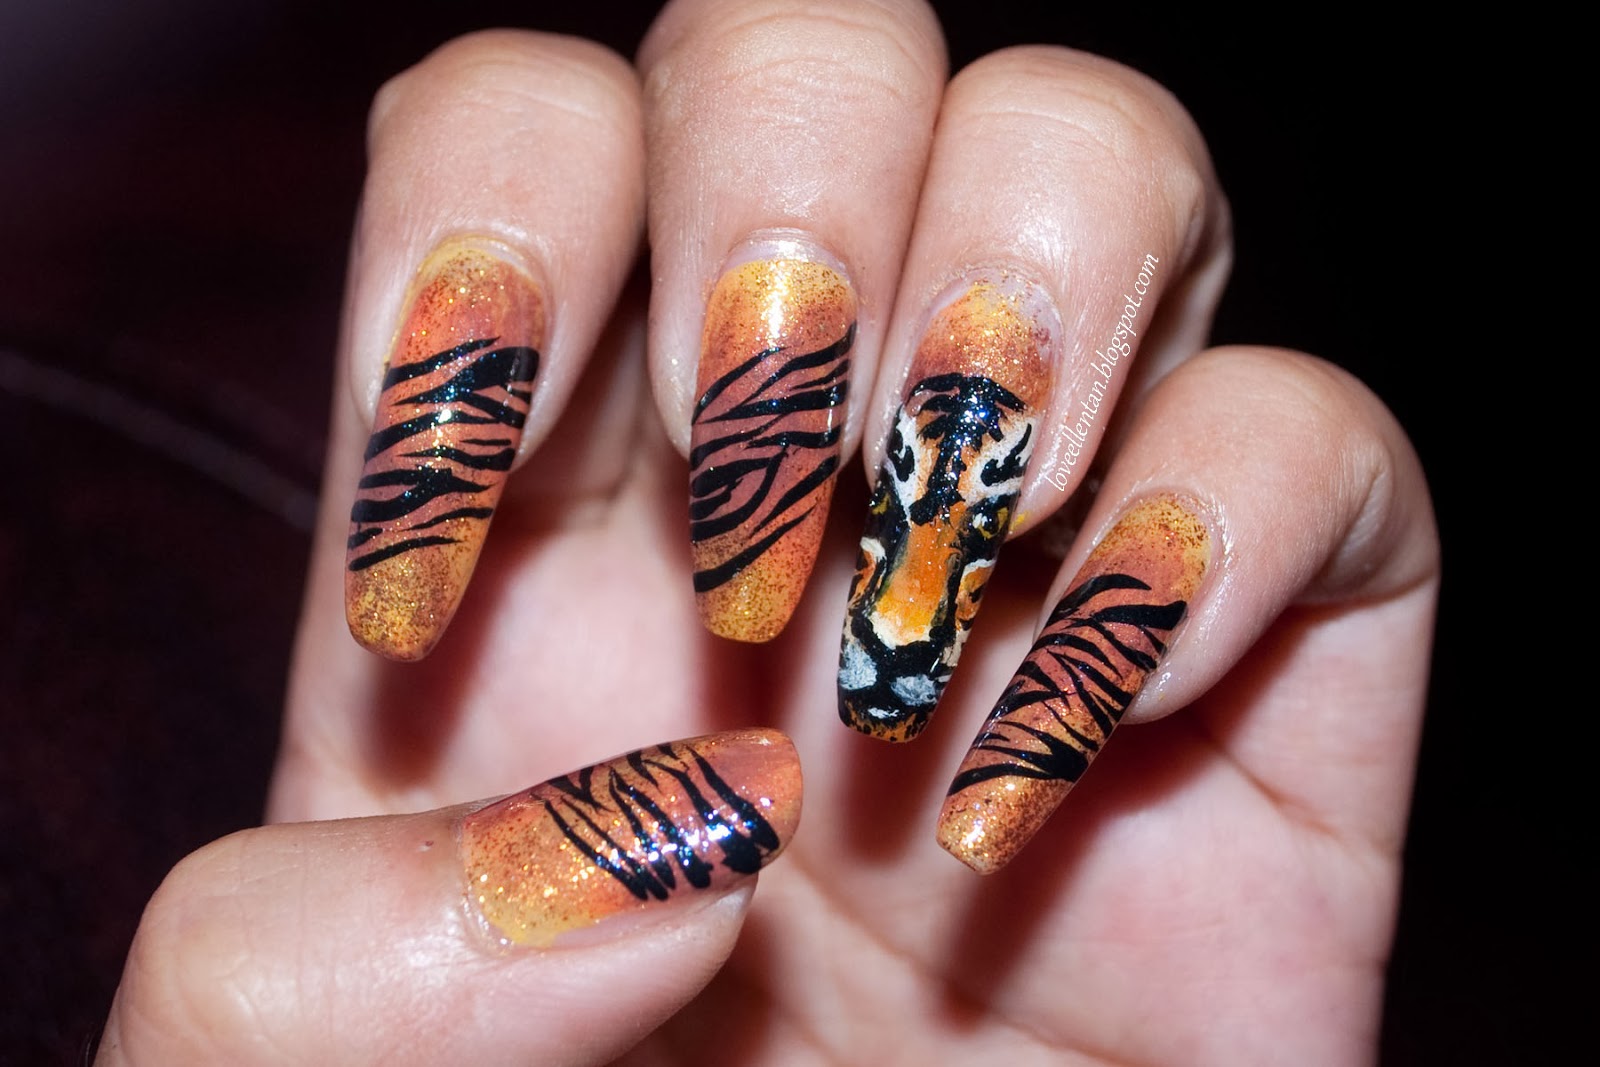 5. "Tiger Nail Art Compilation on Dailymotion" - wide 3